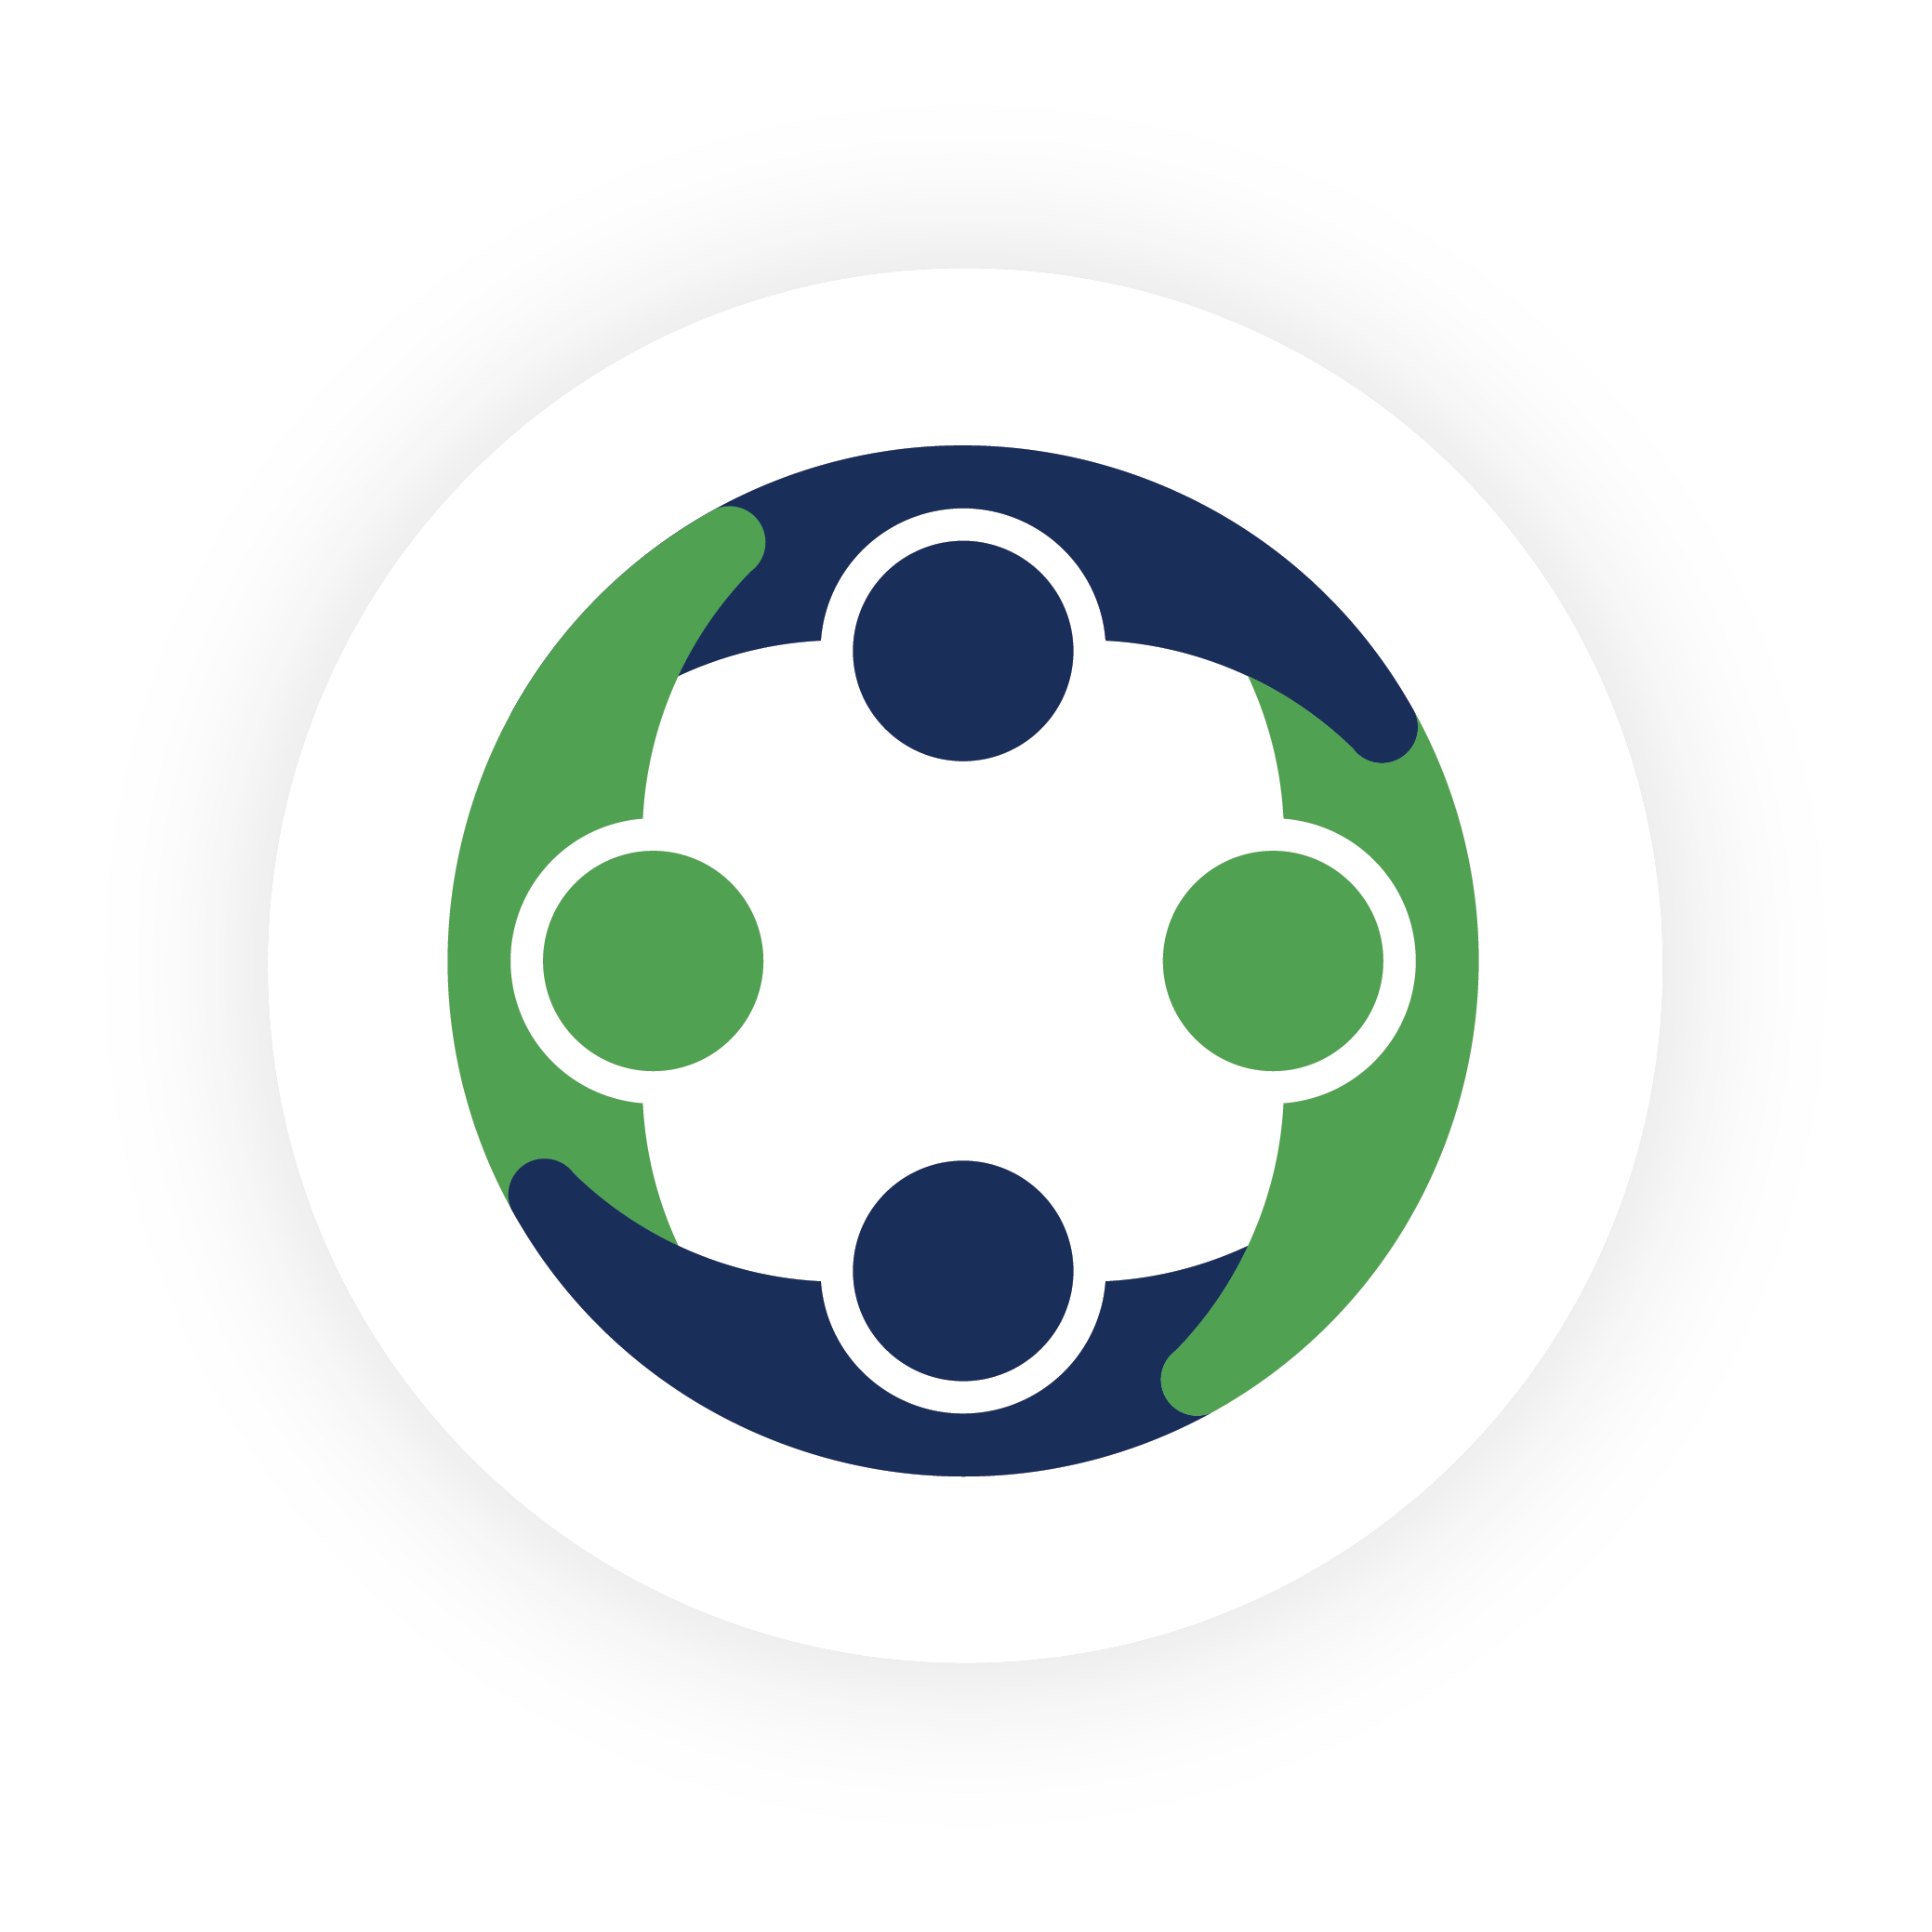 Logo featuring a circular design with a stylized globe in green and blue, surrounded by four white circles interconnected by black rings.